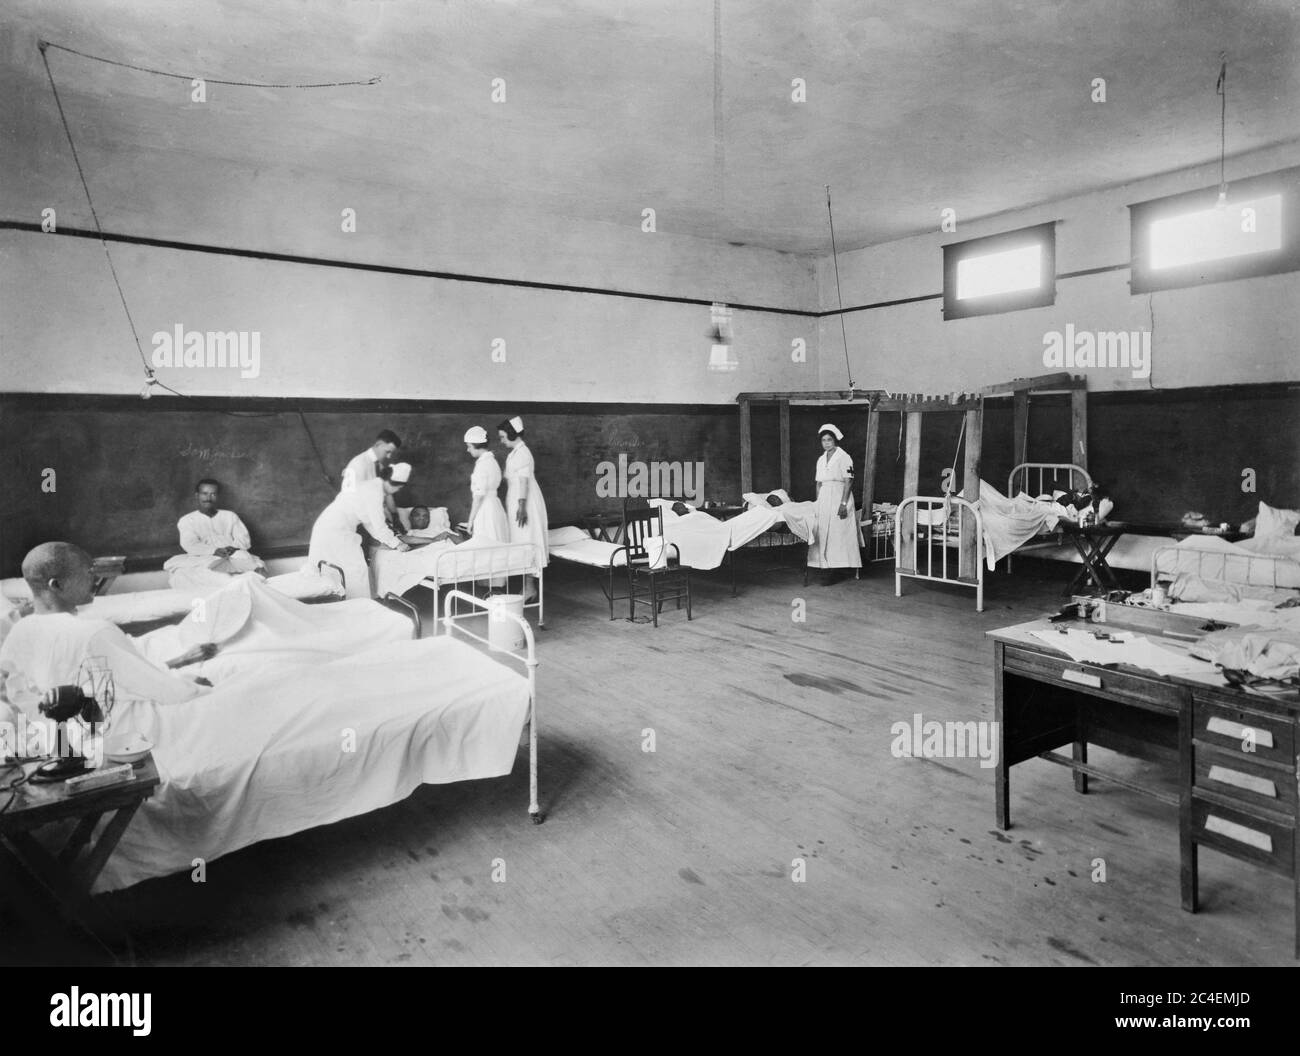 Surgical Ward 1, Red Cross Hospital After Race Riot, Tulsa, Oklahoma, États-Unis, American National Red Cross Photograph Collection, juin 1921 Banque D'Images